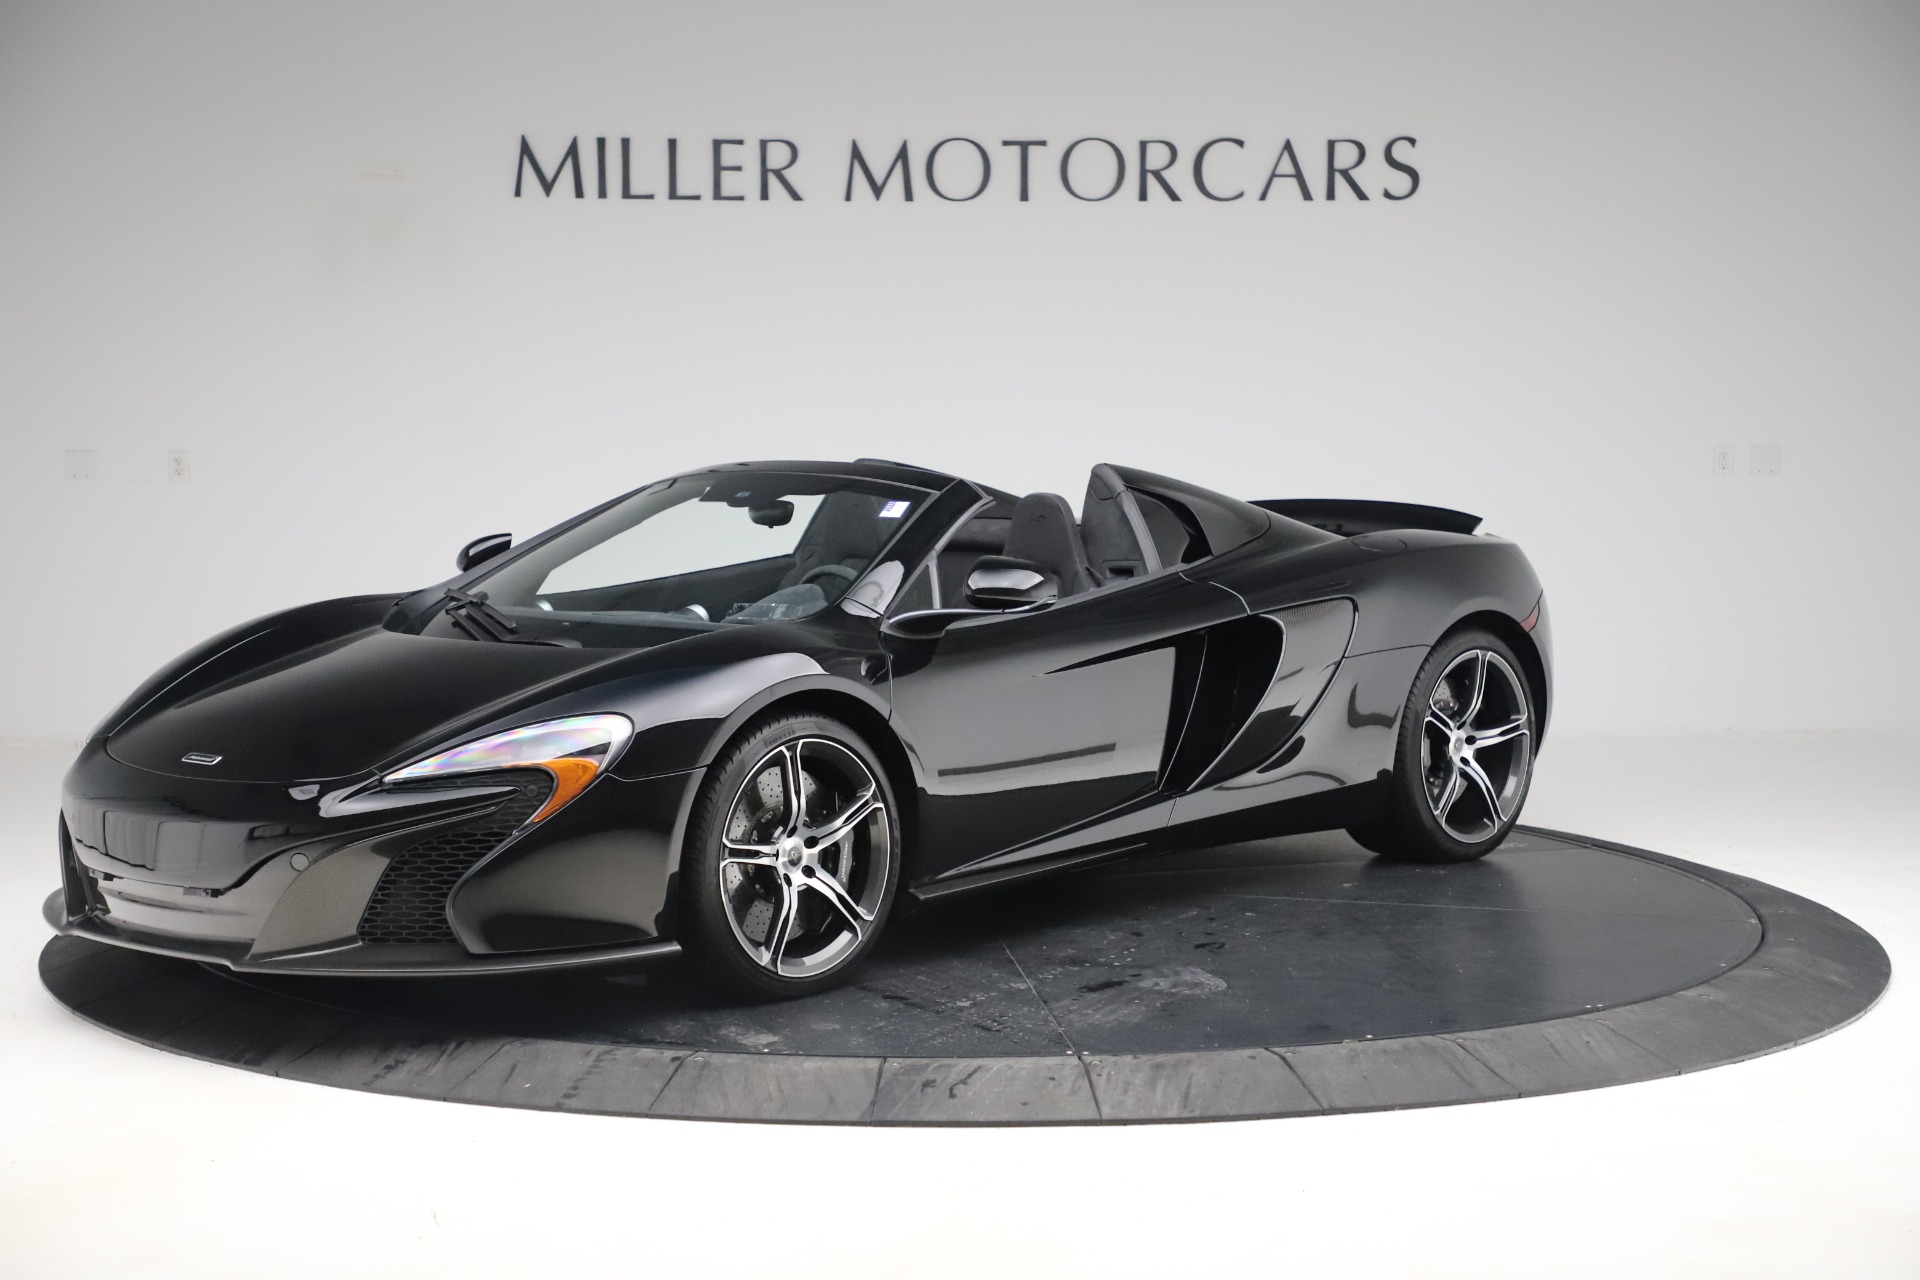 Used 2015 McLaren 650S Spider for sale Sold at Pagani of Greenwich in Greenwich CT 06830 1